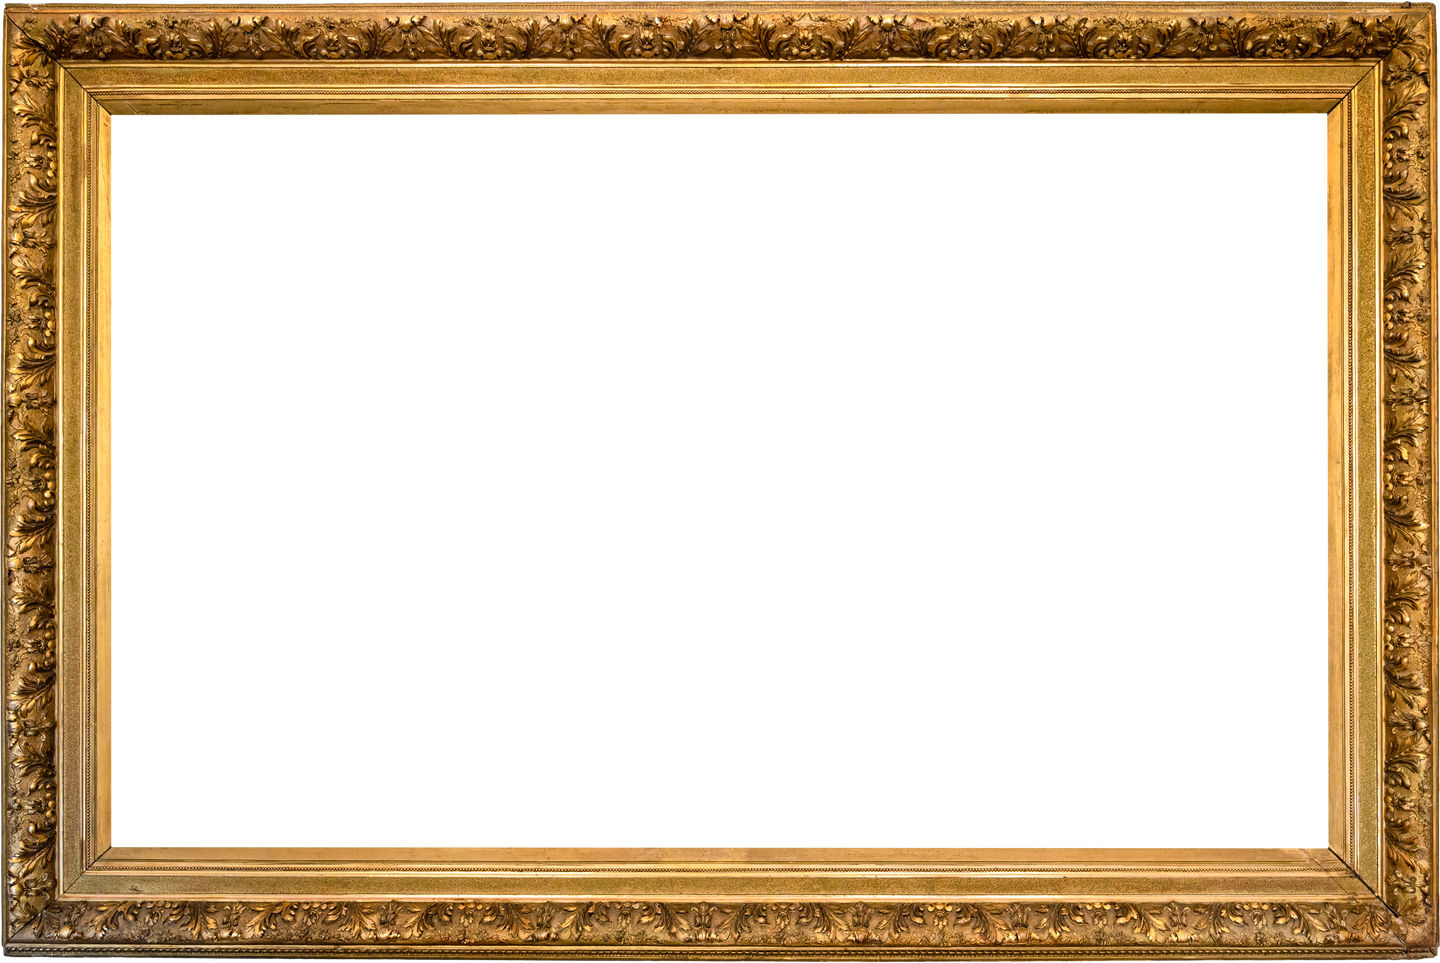 blank ornamental gold picture frame cut out